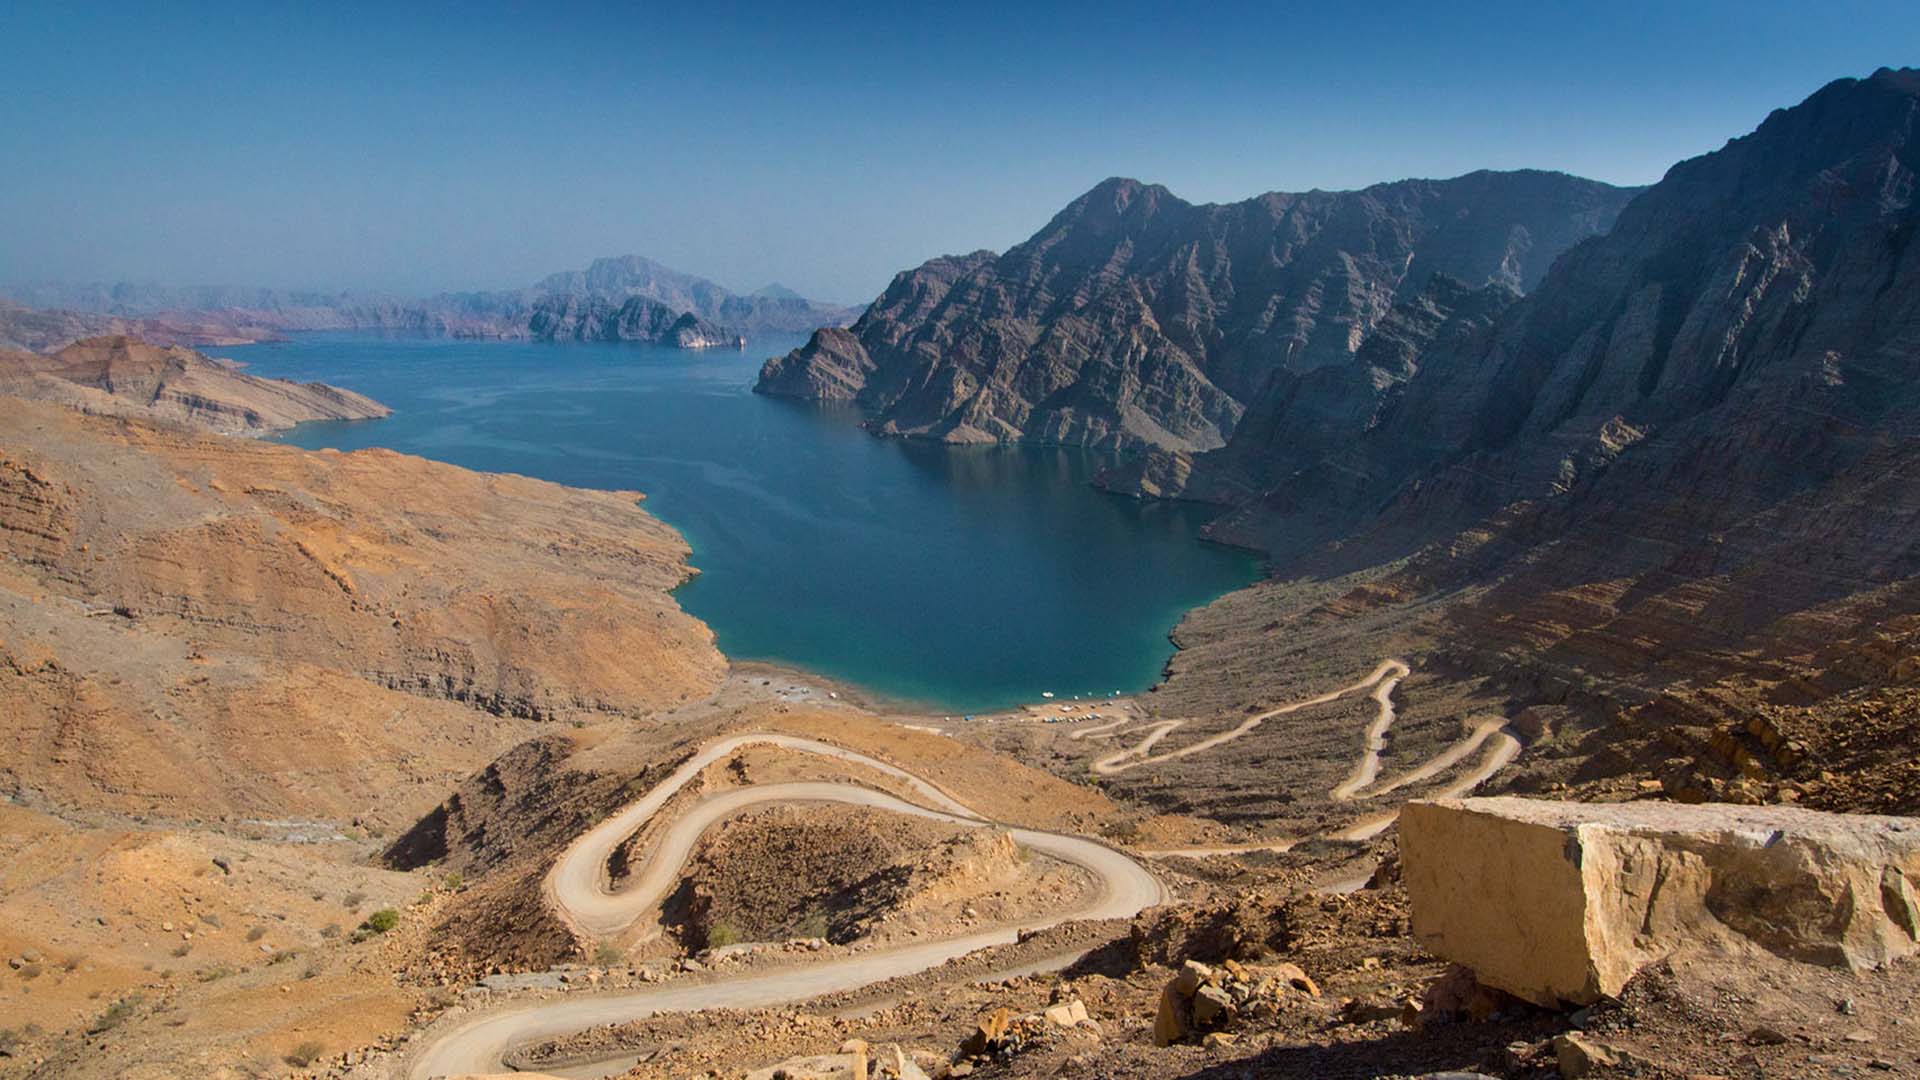 A panoramic photograph immortalizes Jebel Harim, the towering apex of the Musandam Peninsula in Oman, encircled by a majestic range of mountains, creating a breathtaking vista of natural grandeur.